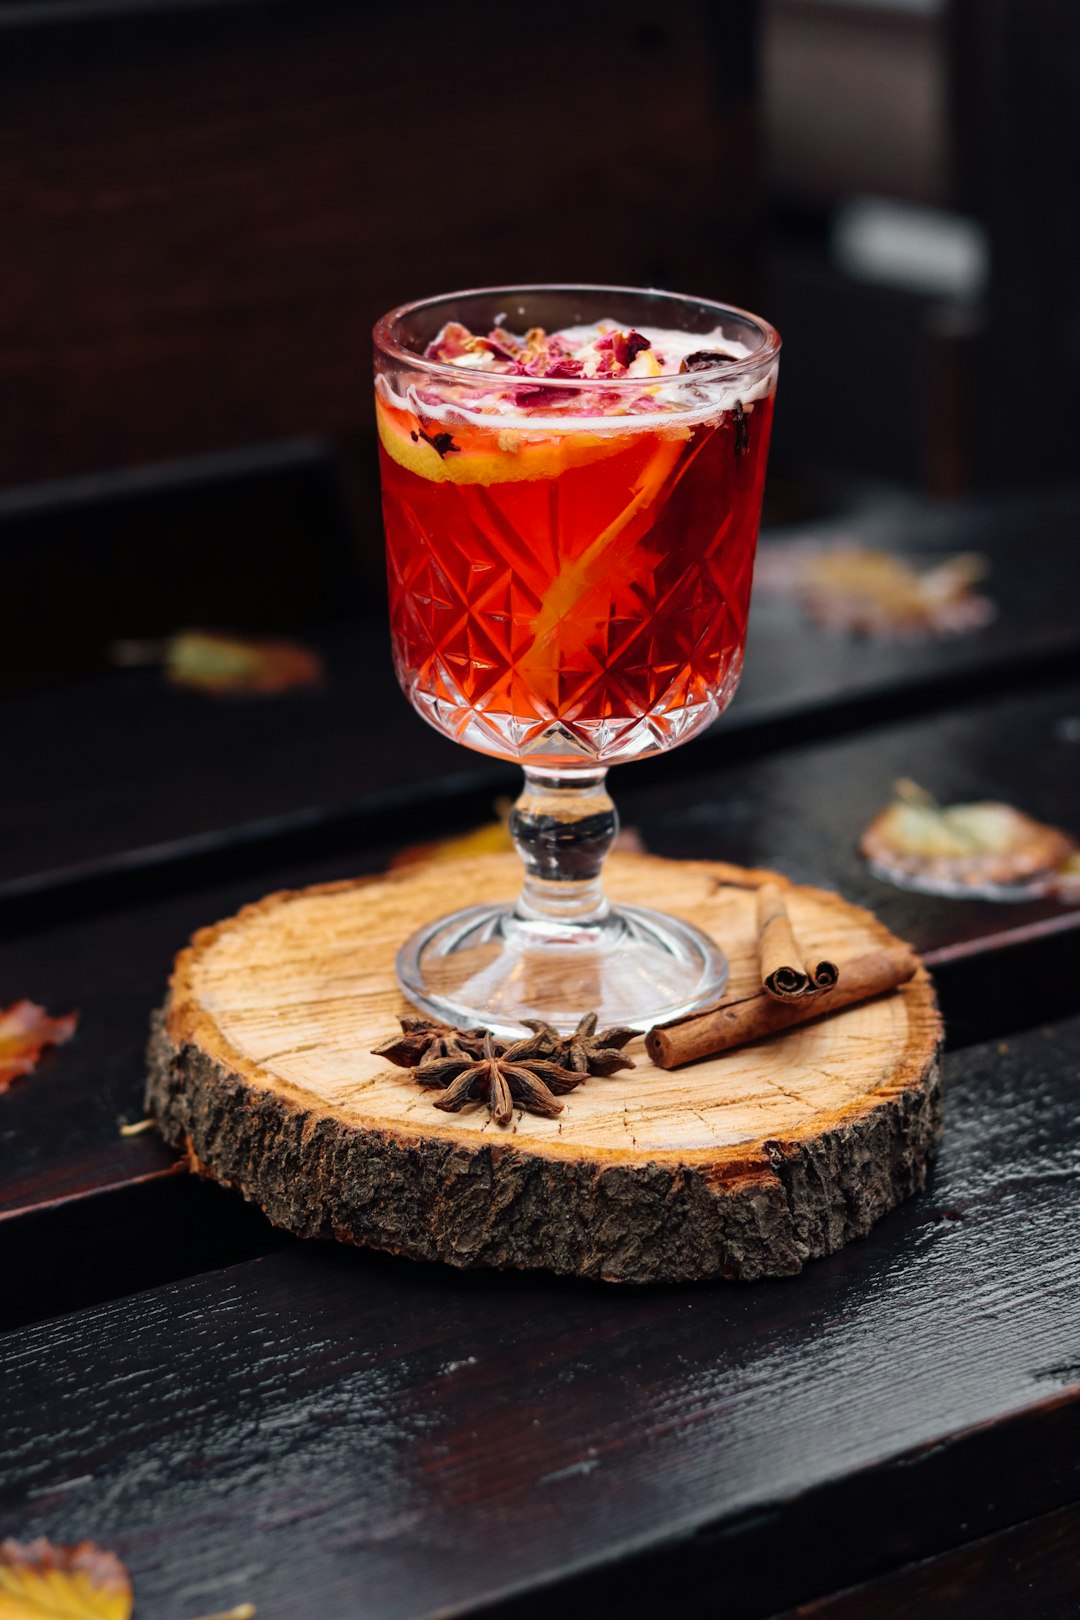 clear glass cup with red liquid on brown wooden coaster